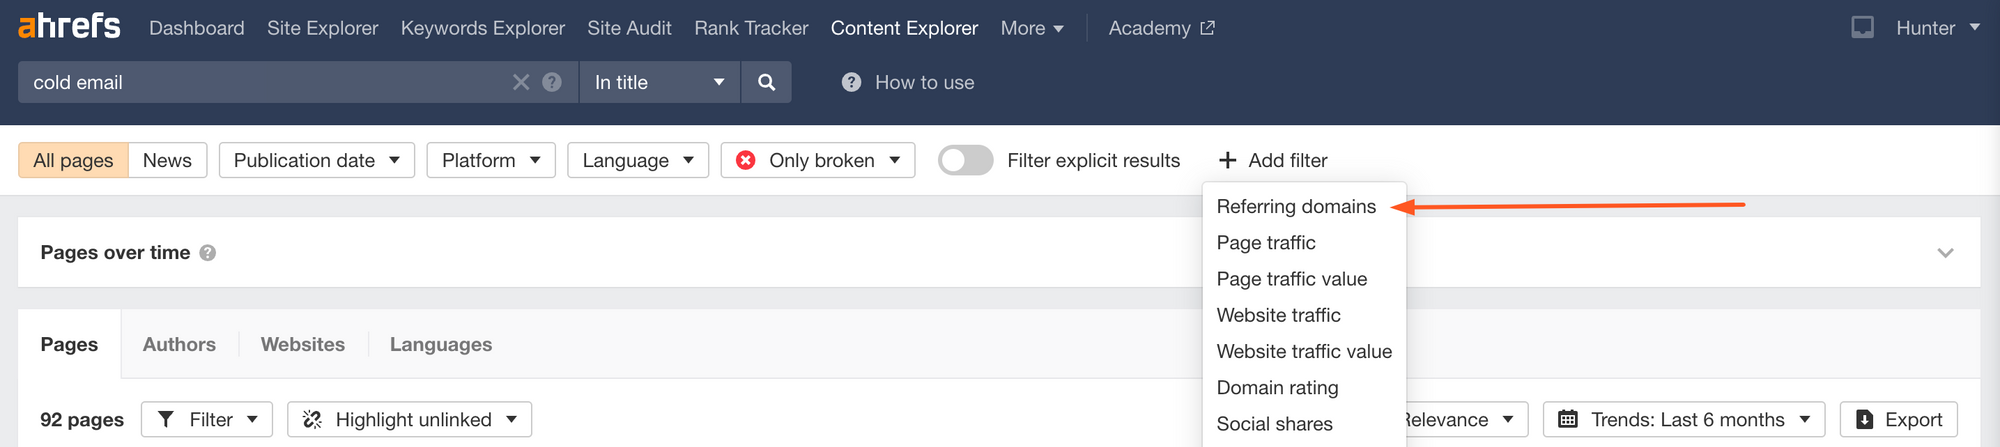 Setting a referring domains filter in Ahrefs' Content Explorer tool